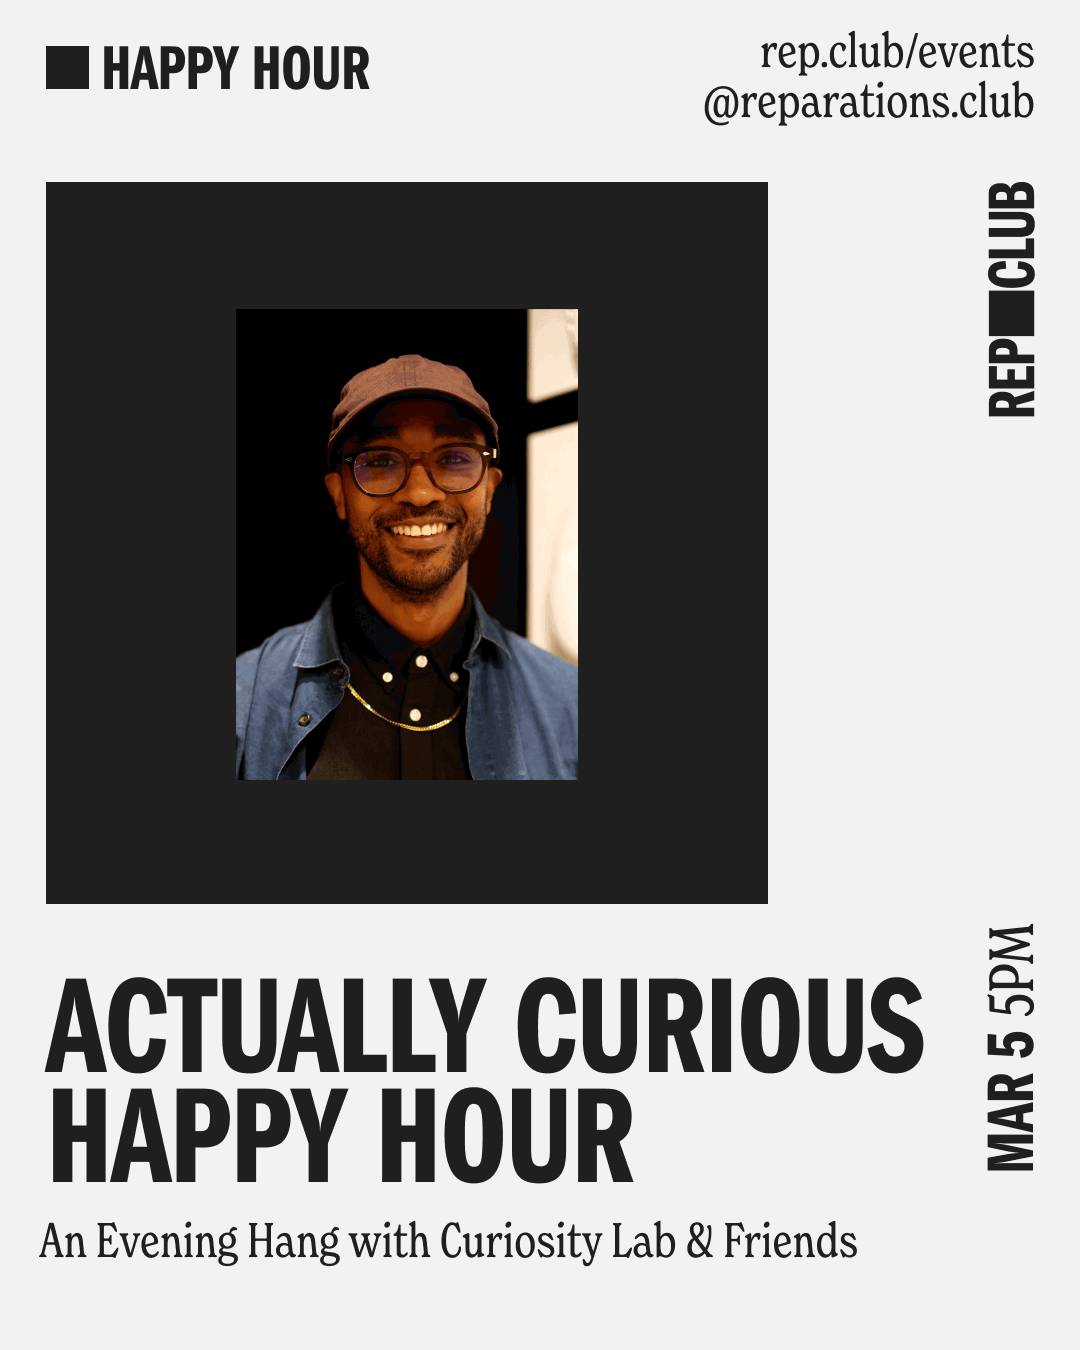 March 5th EVENT: Actually Curious Happy Hour